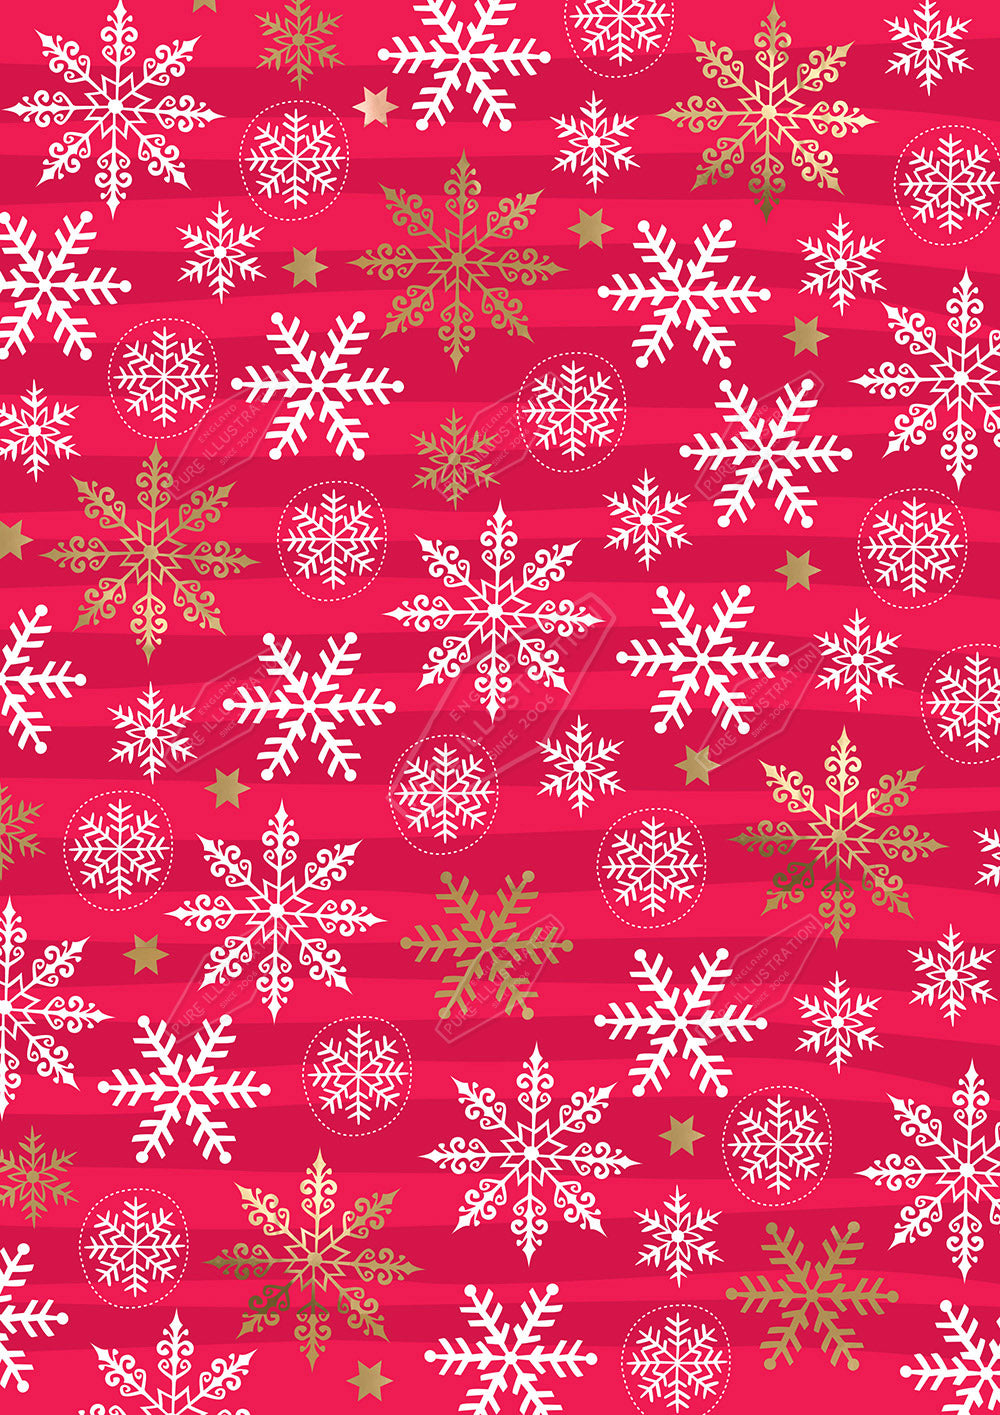 00035052IMC - Snowflake Pattern by Isla McDonald for Pure Art Licensing Agency International Product & Packaging Surface Design 